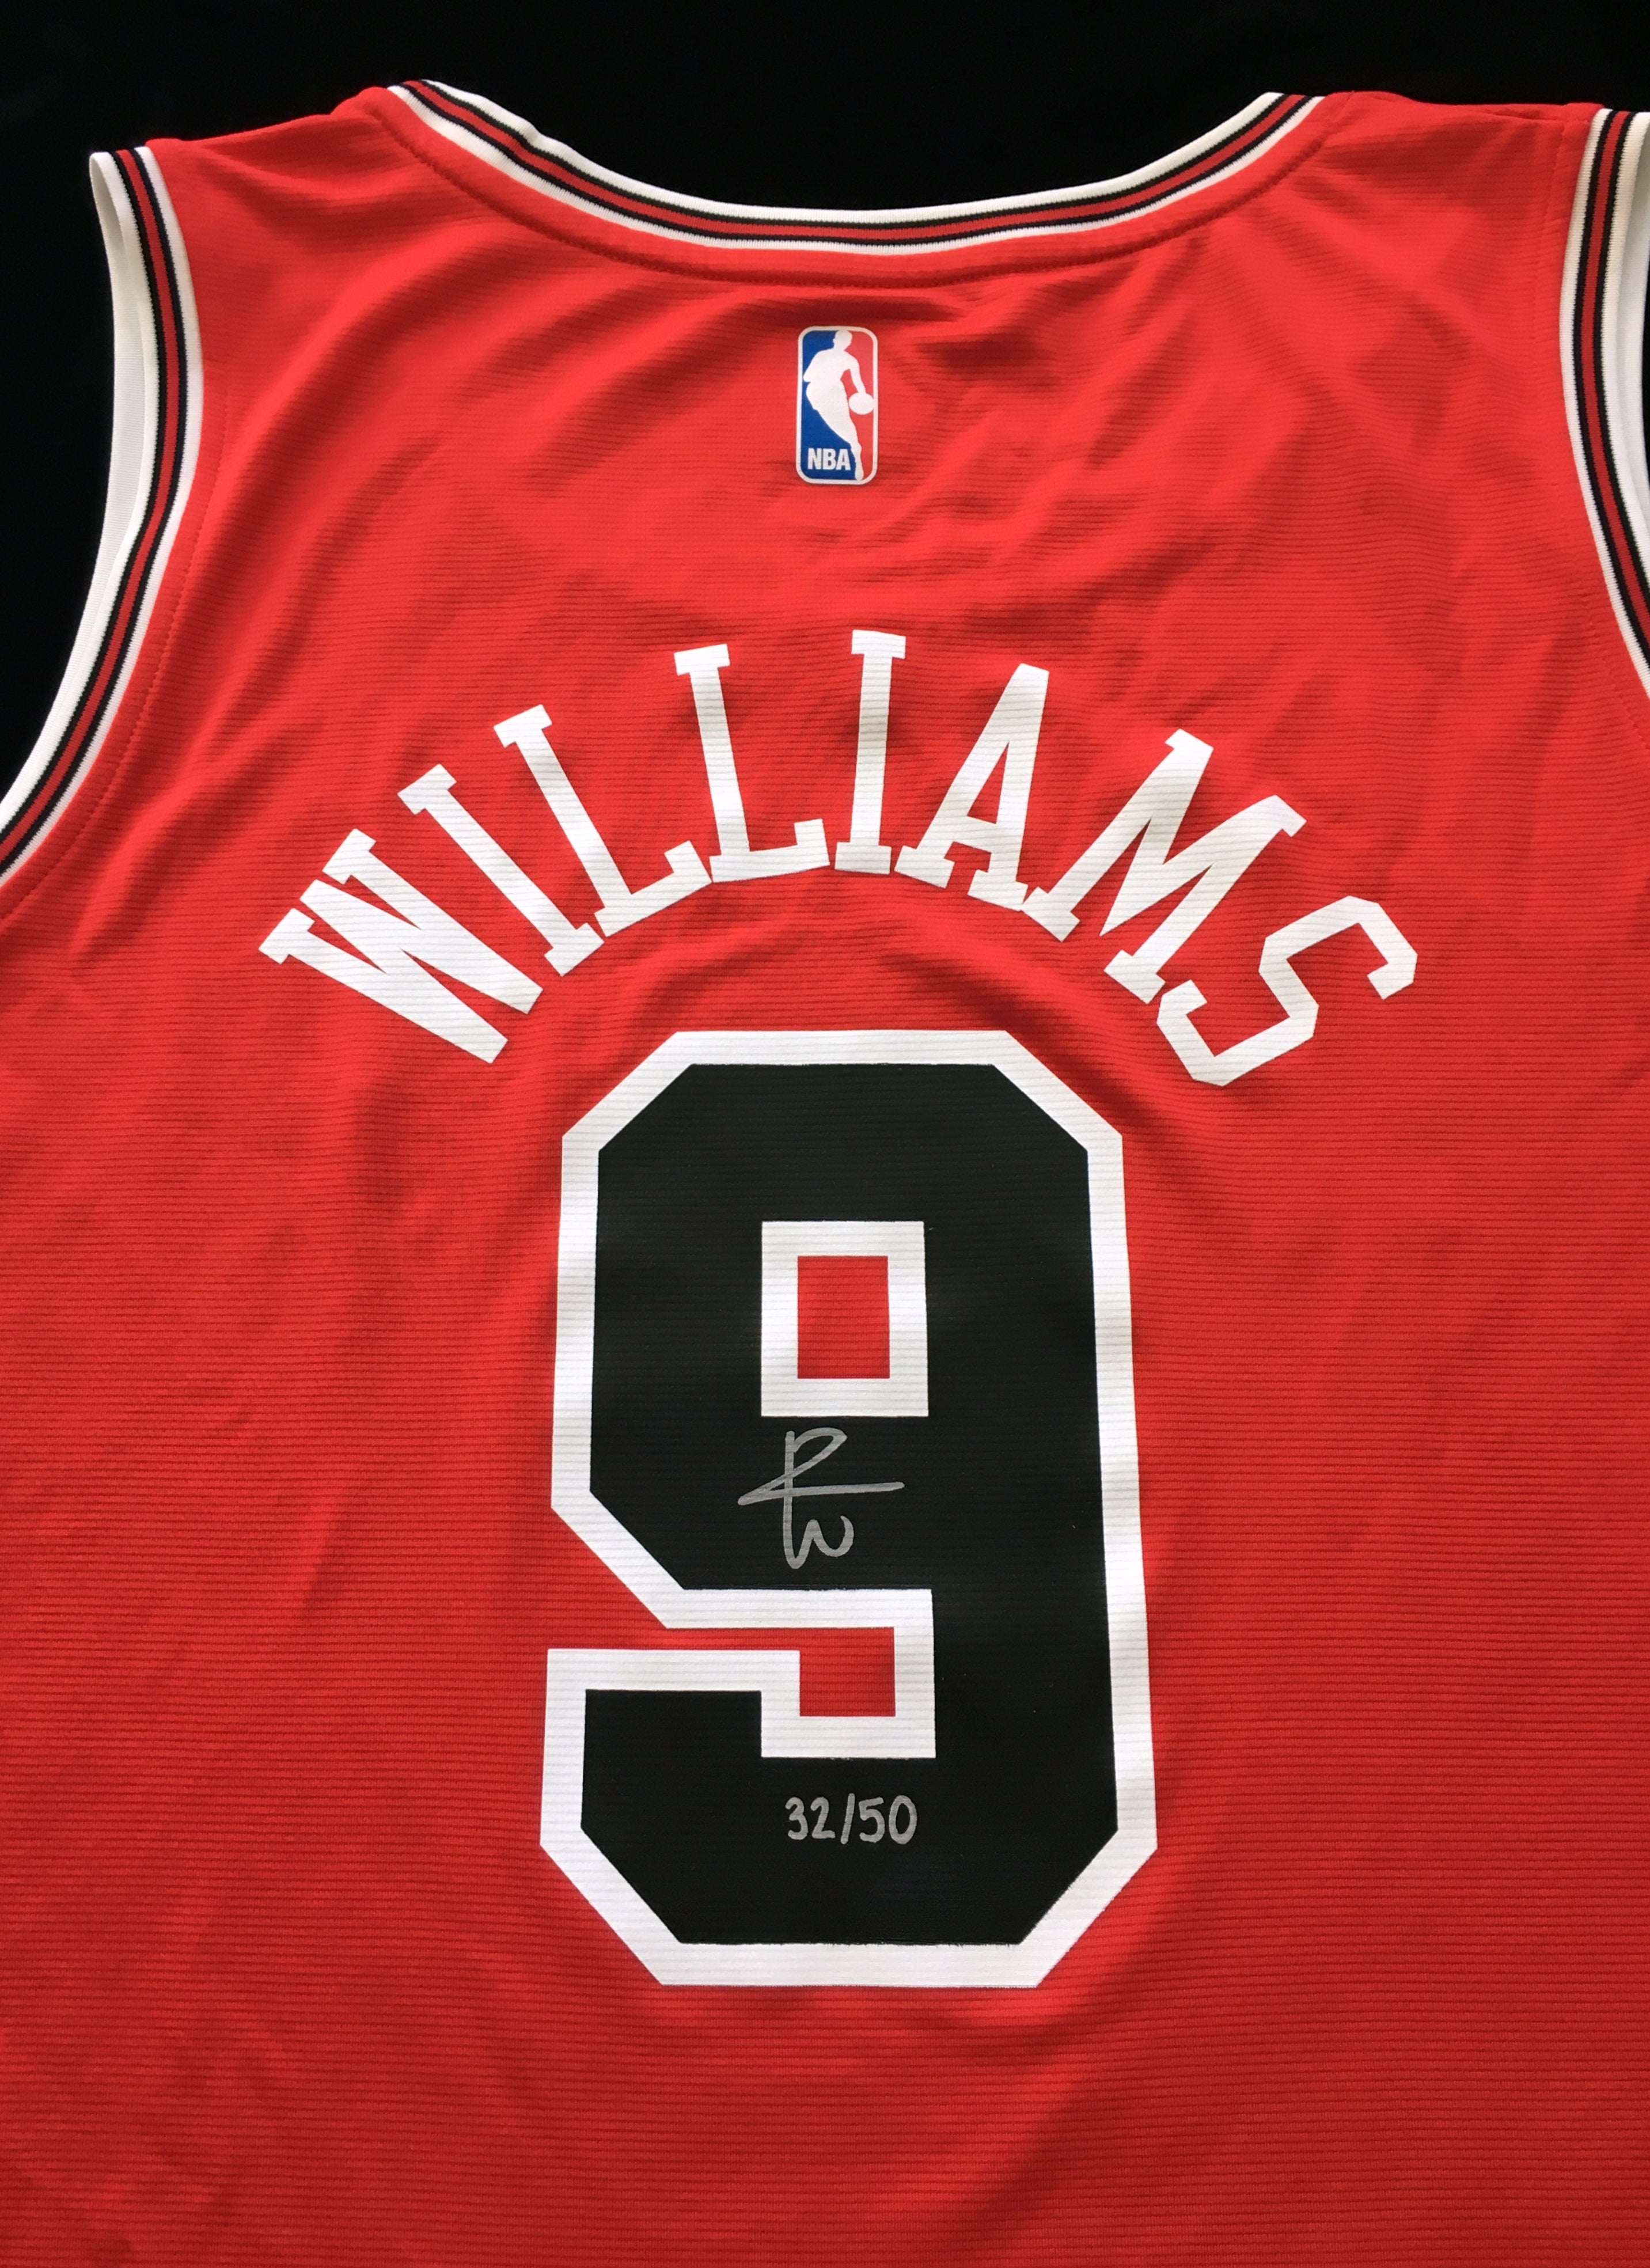 Patrick Williams Autographed Signed Chicago Bulls Jersey (Beckett